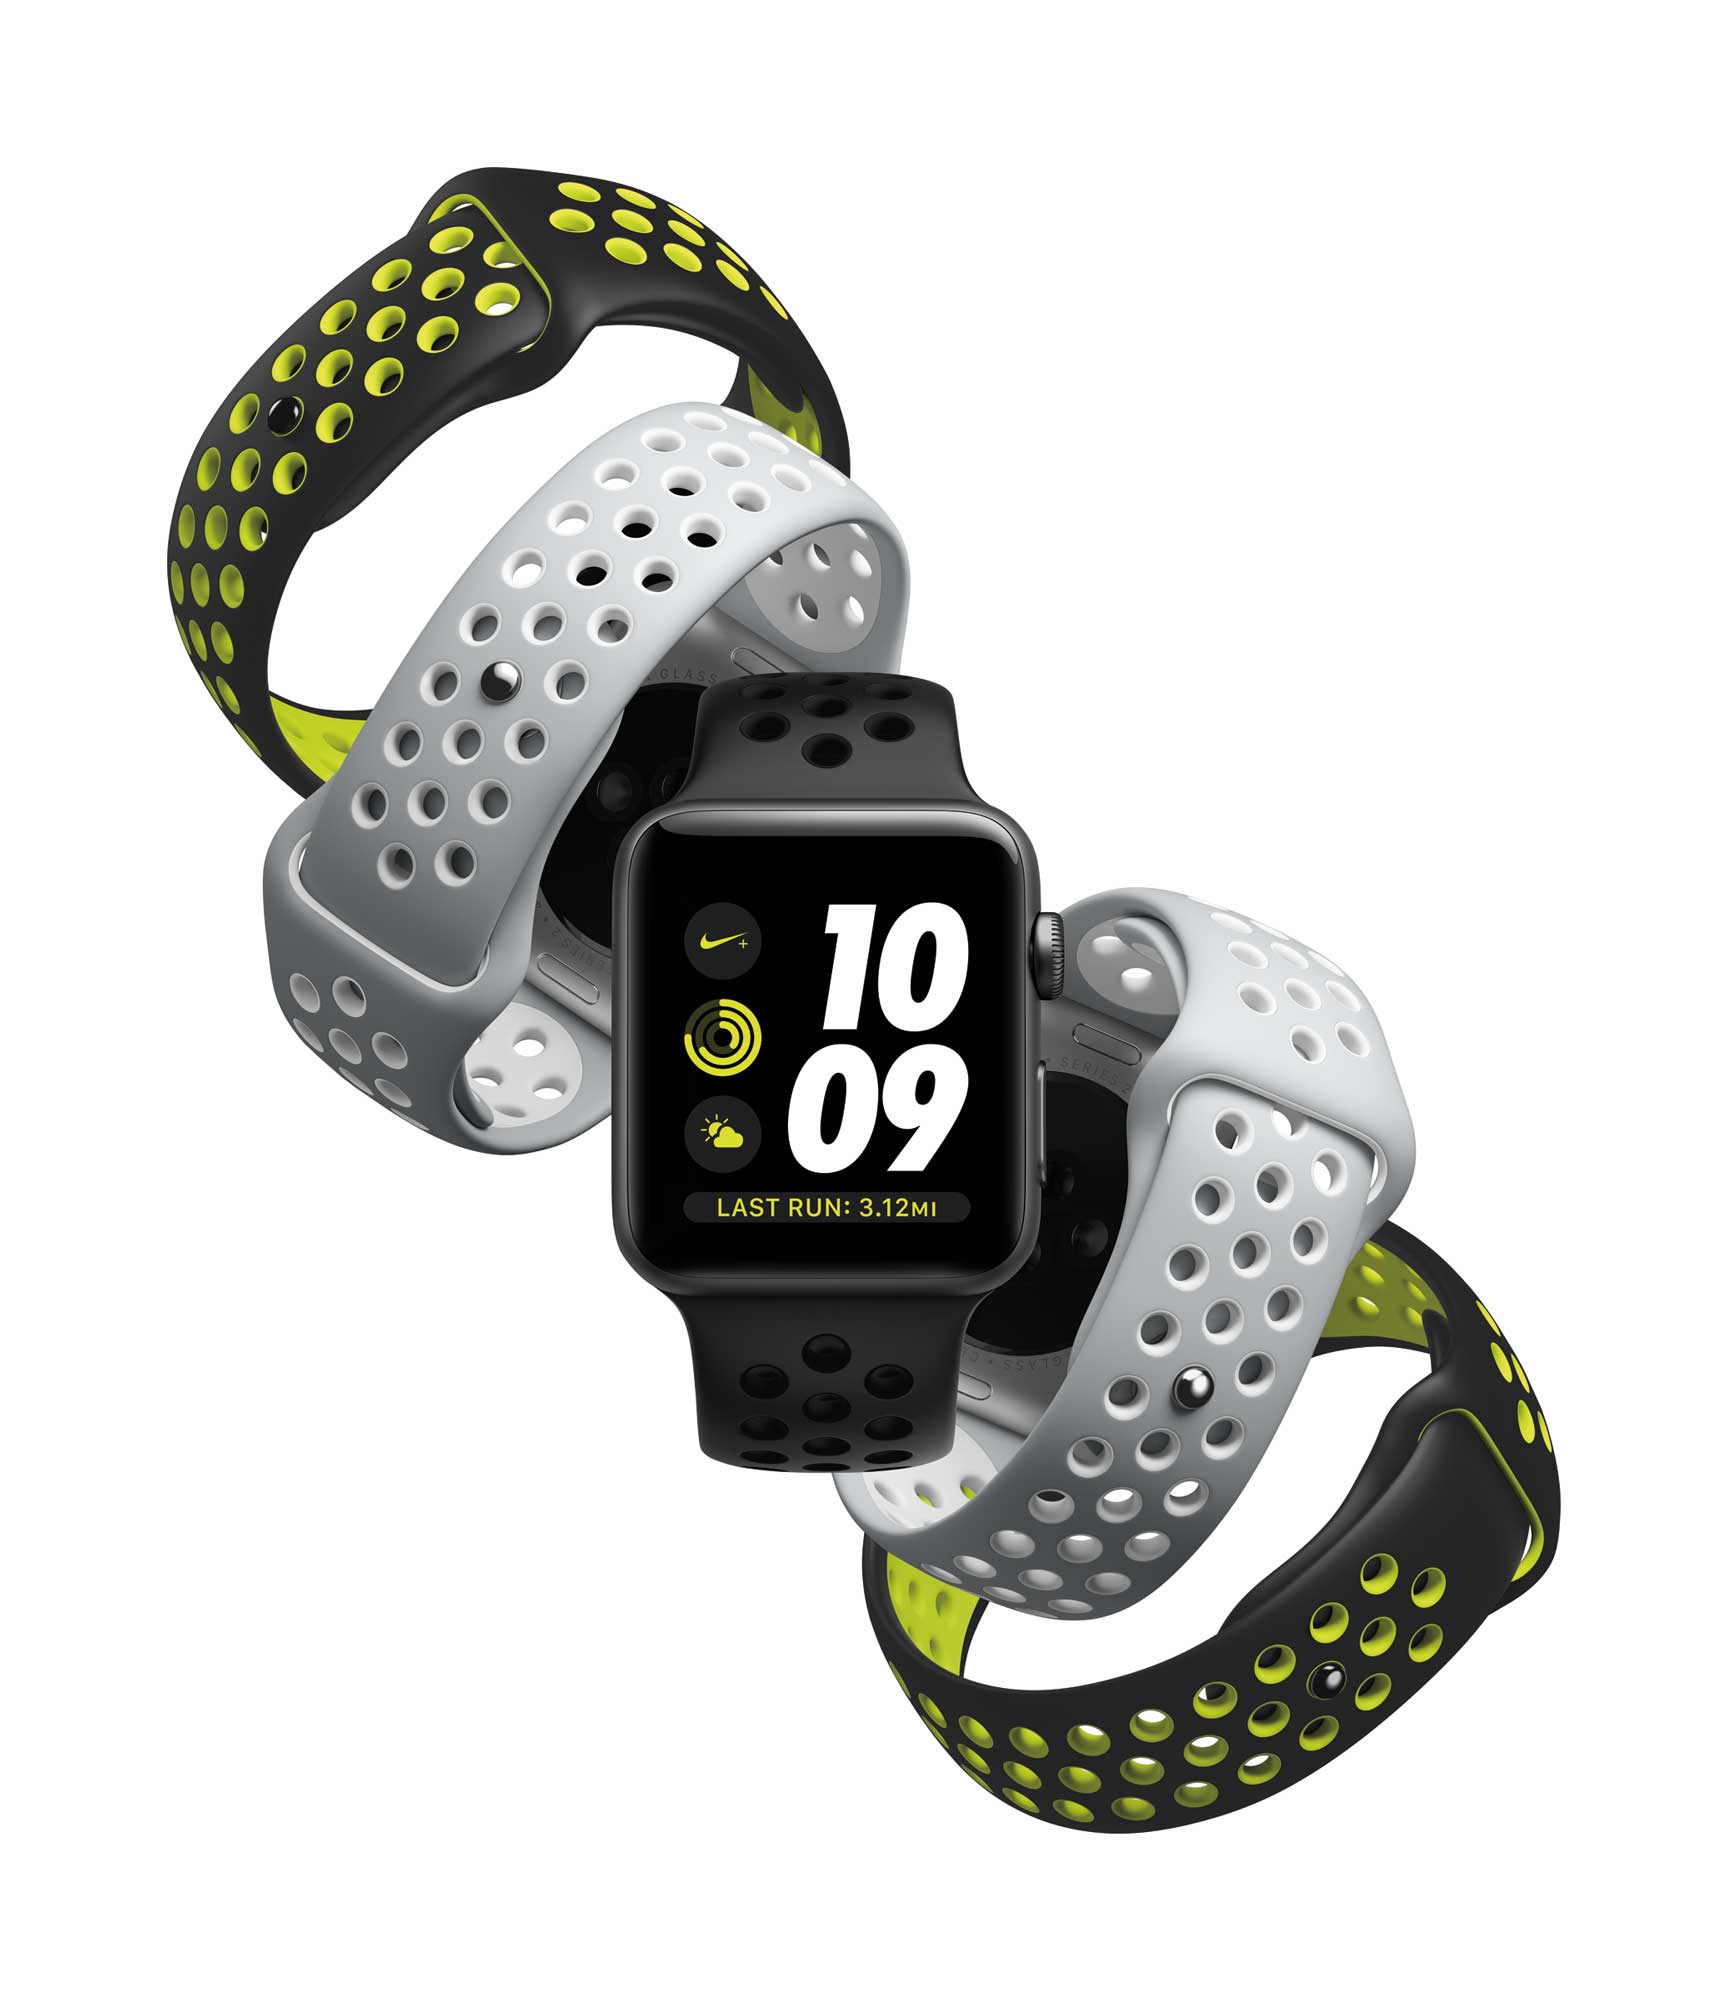 New Apple Watch Bands Released, Nike Sports Bands At A$79 Mac Prices Australia